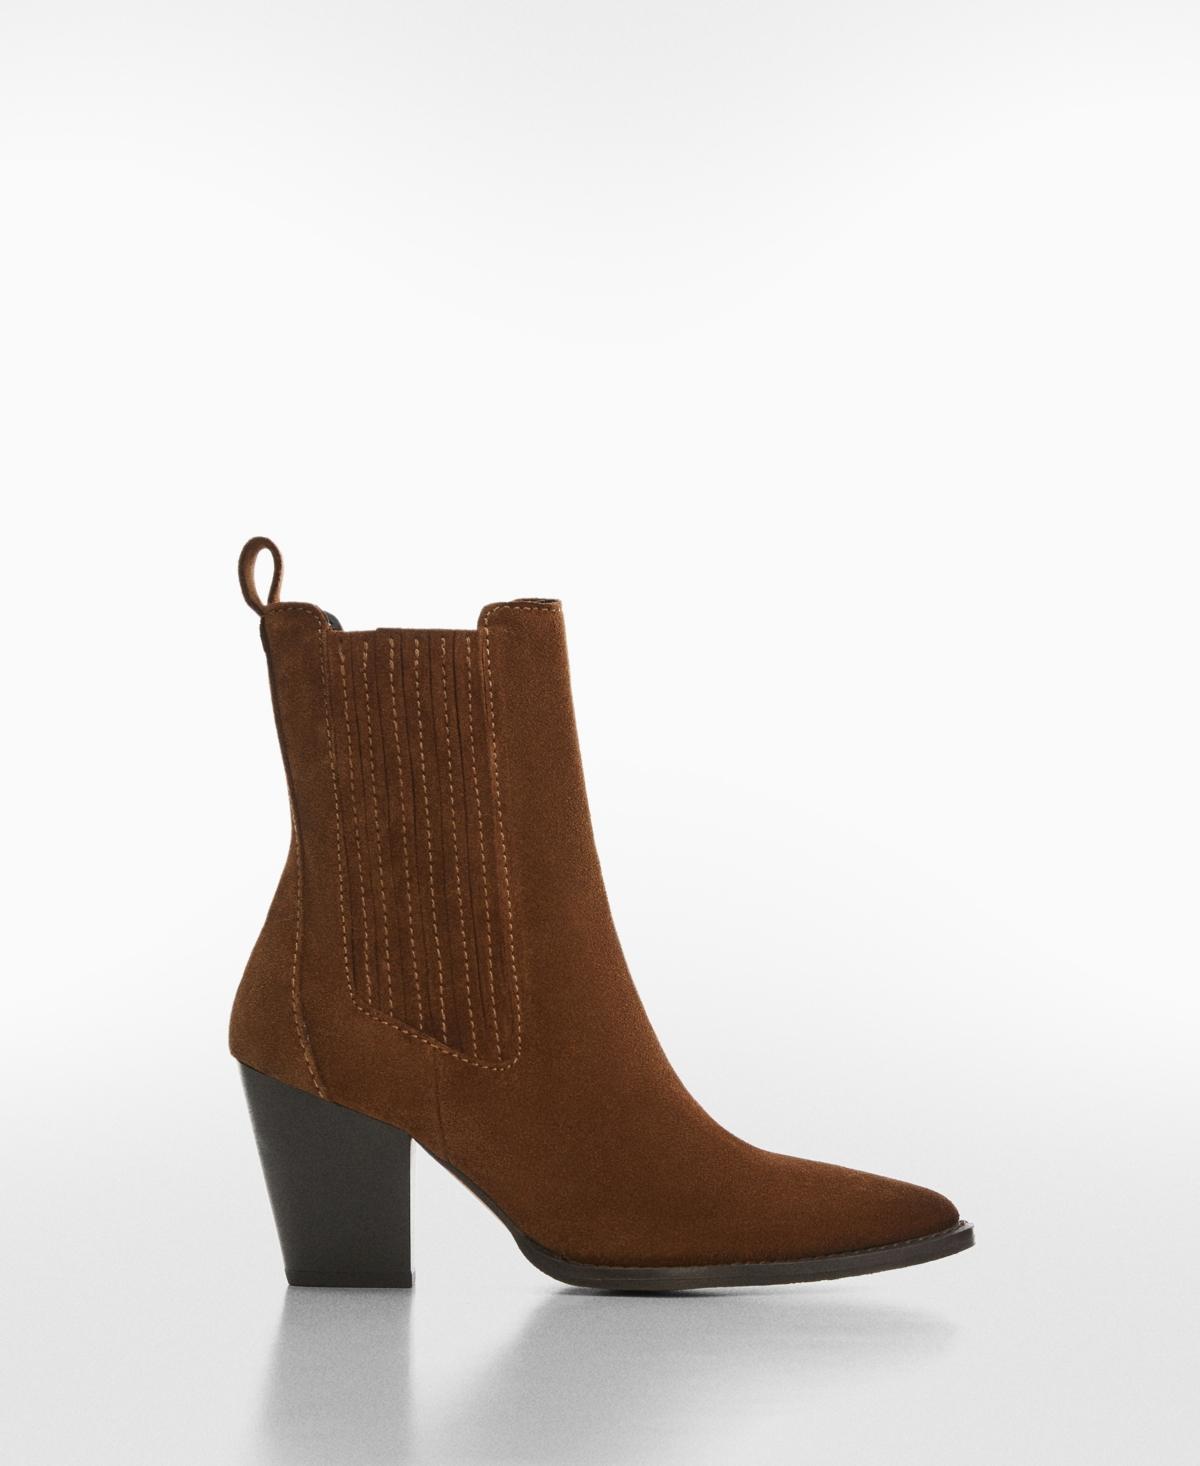 Mango Suede Leather Ankle Boots in Brown | Lyst